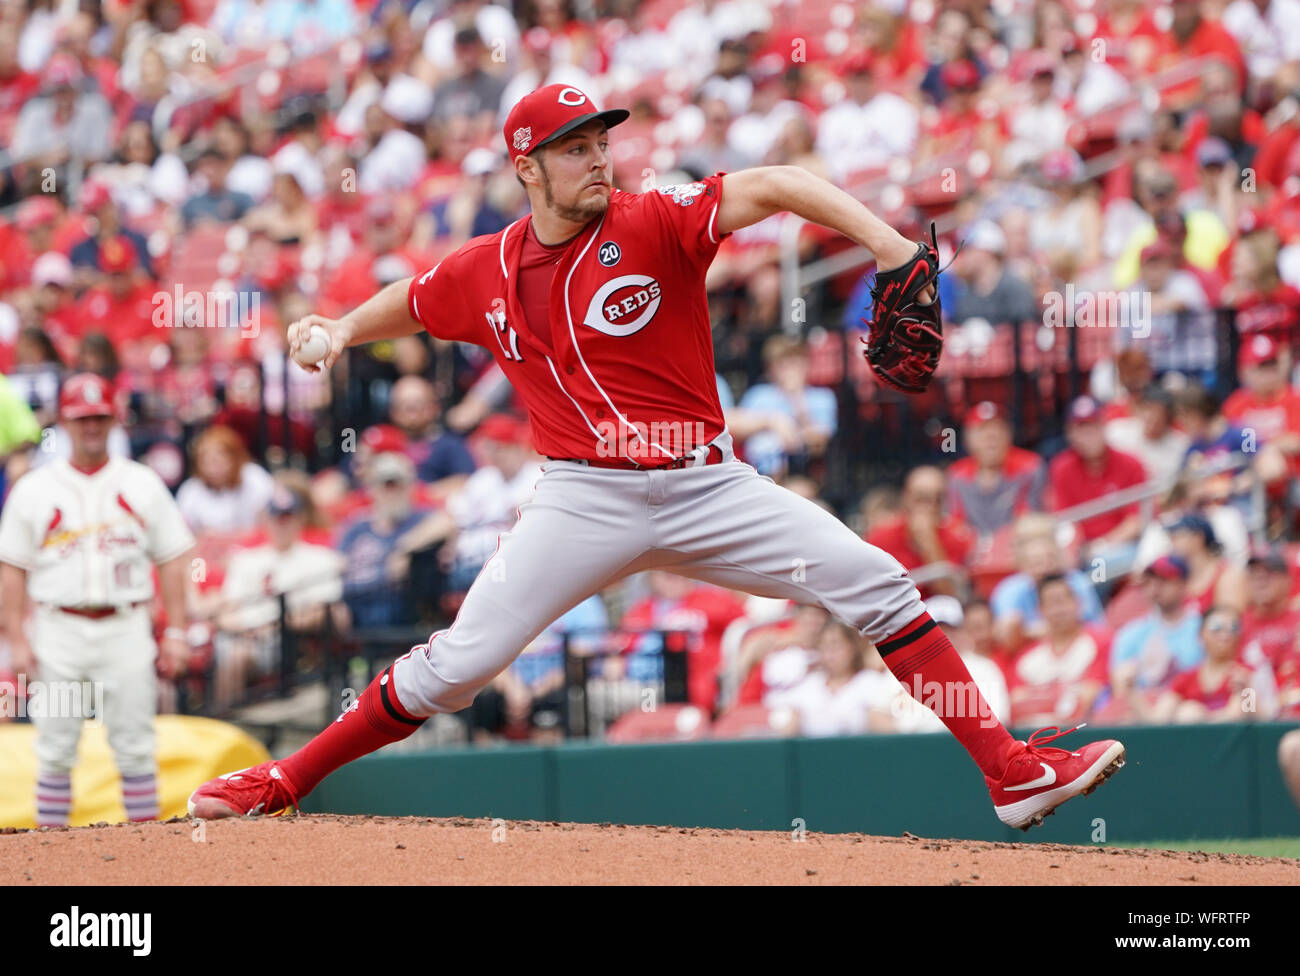 Cincinnati Reds starting pitcher Trevor Bauer delivers a pitch to the St. Louis Cardinals in the third inning at Busch Stadium in St. Louis on Saturday August 31, 2019. Photo by Bill Greenblatt/UPI Stock Photo